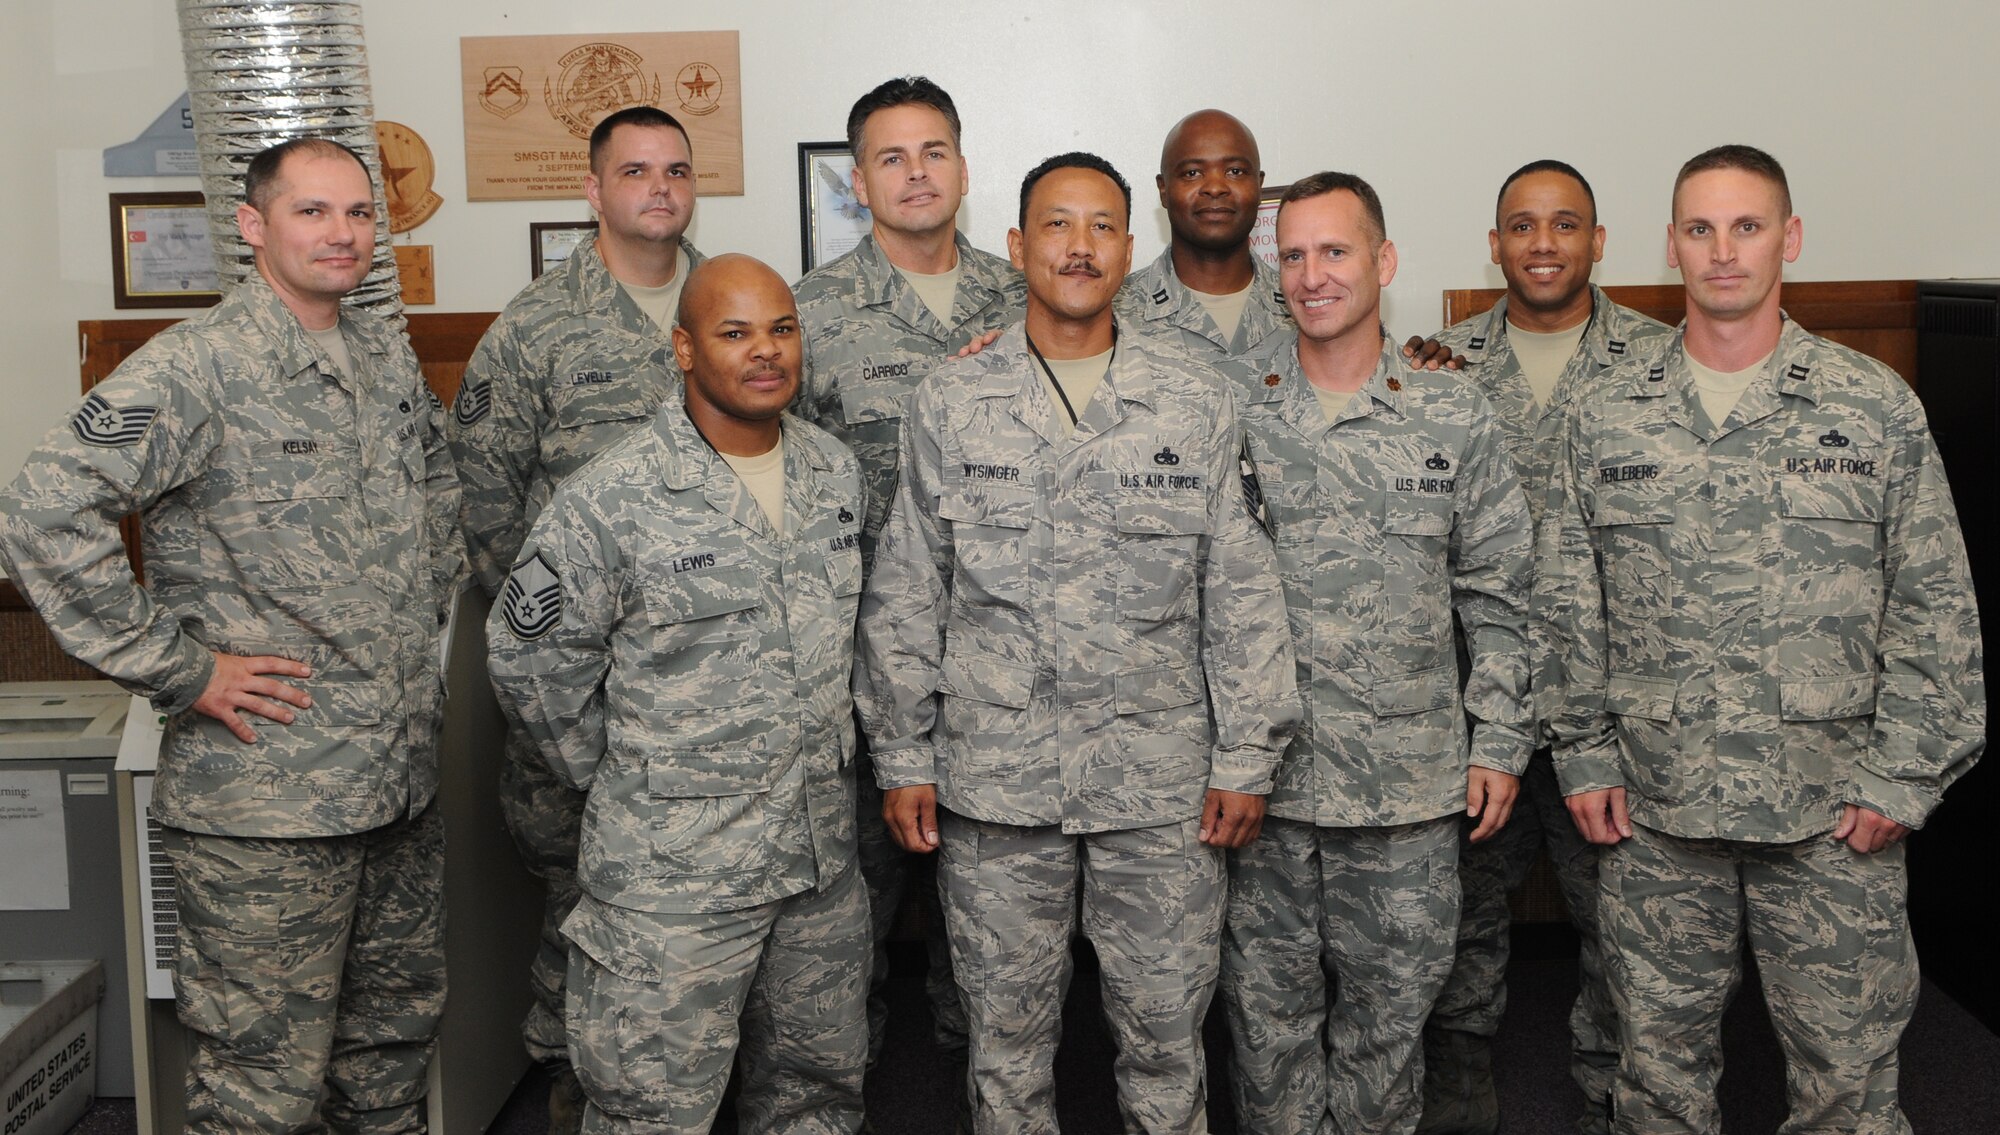 KADENA AIR BASE, Japan -- Senior Master Sgt. Mack Wysinger III (center front) and other members the 353rd Special Operations Maintenance Squadron pose for a photo after Sergeant Wysinger was informed of his selection for promotion to chief master sergeant here Nov. 3.